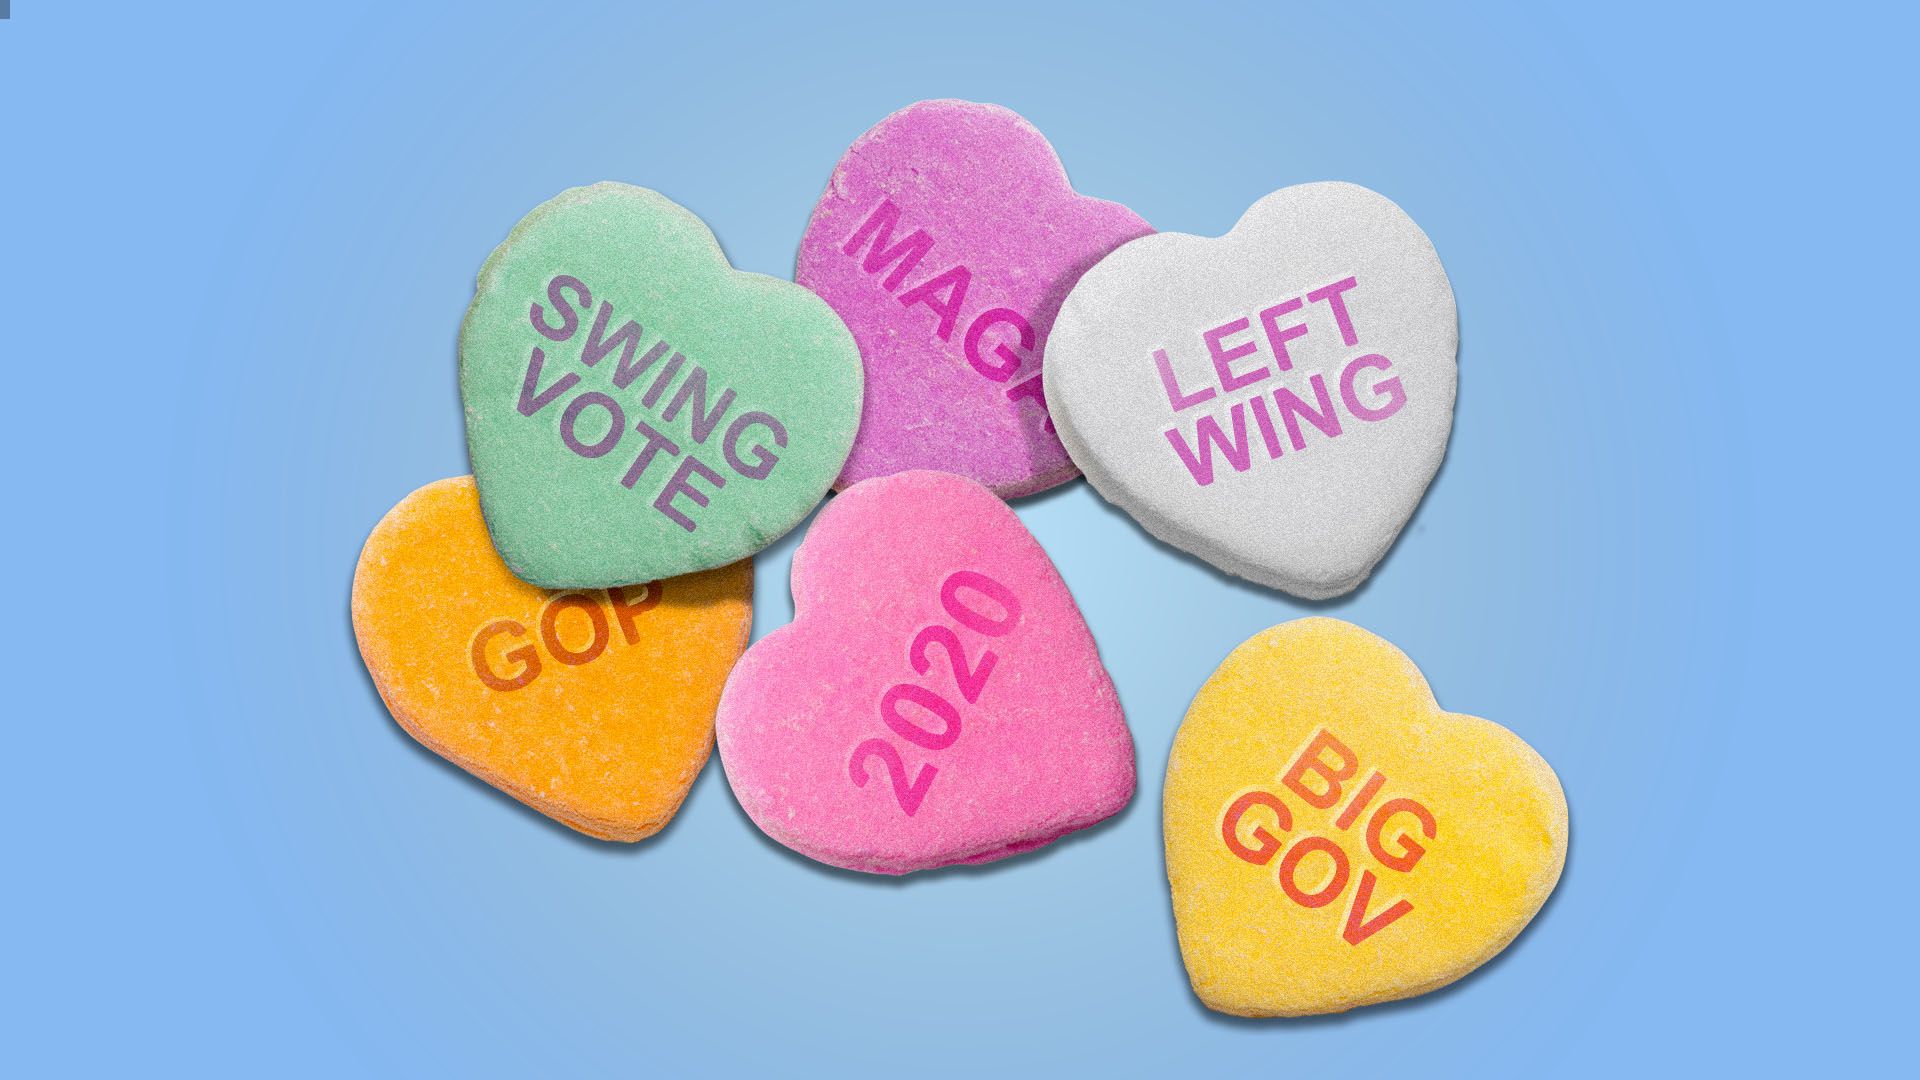 An illustration of Valentine's Day candies with political affiliations written on them.